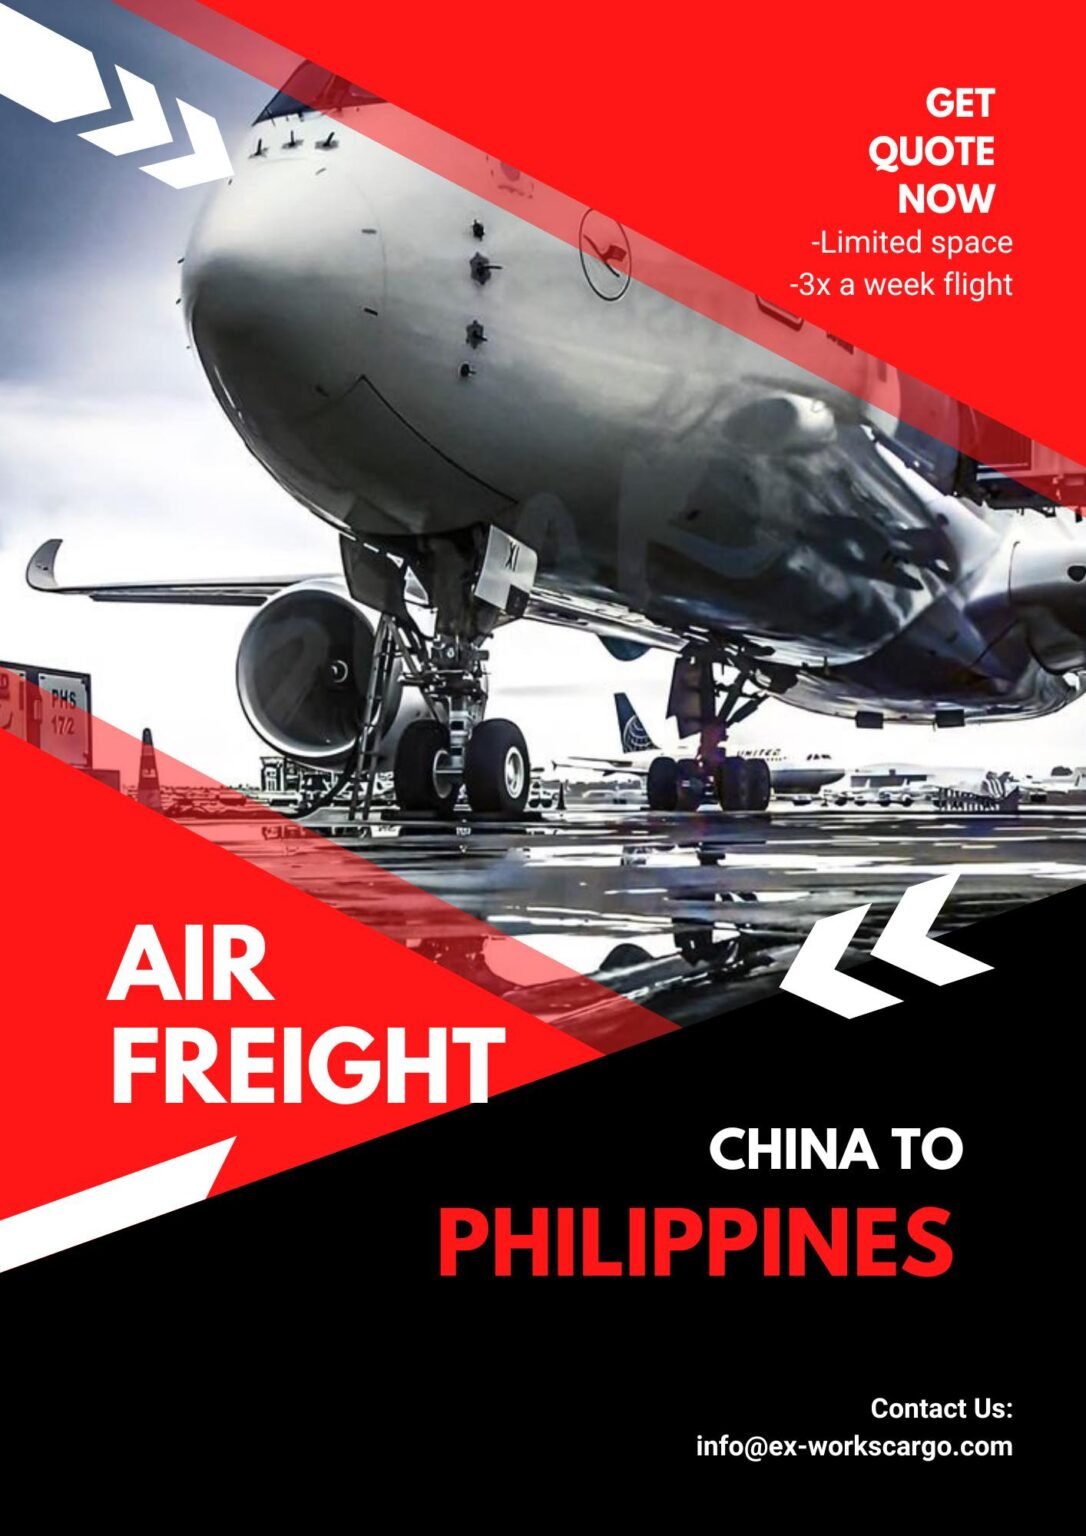 Freight Forwarder and Customs Brokerage